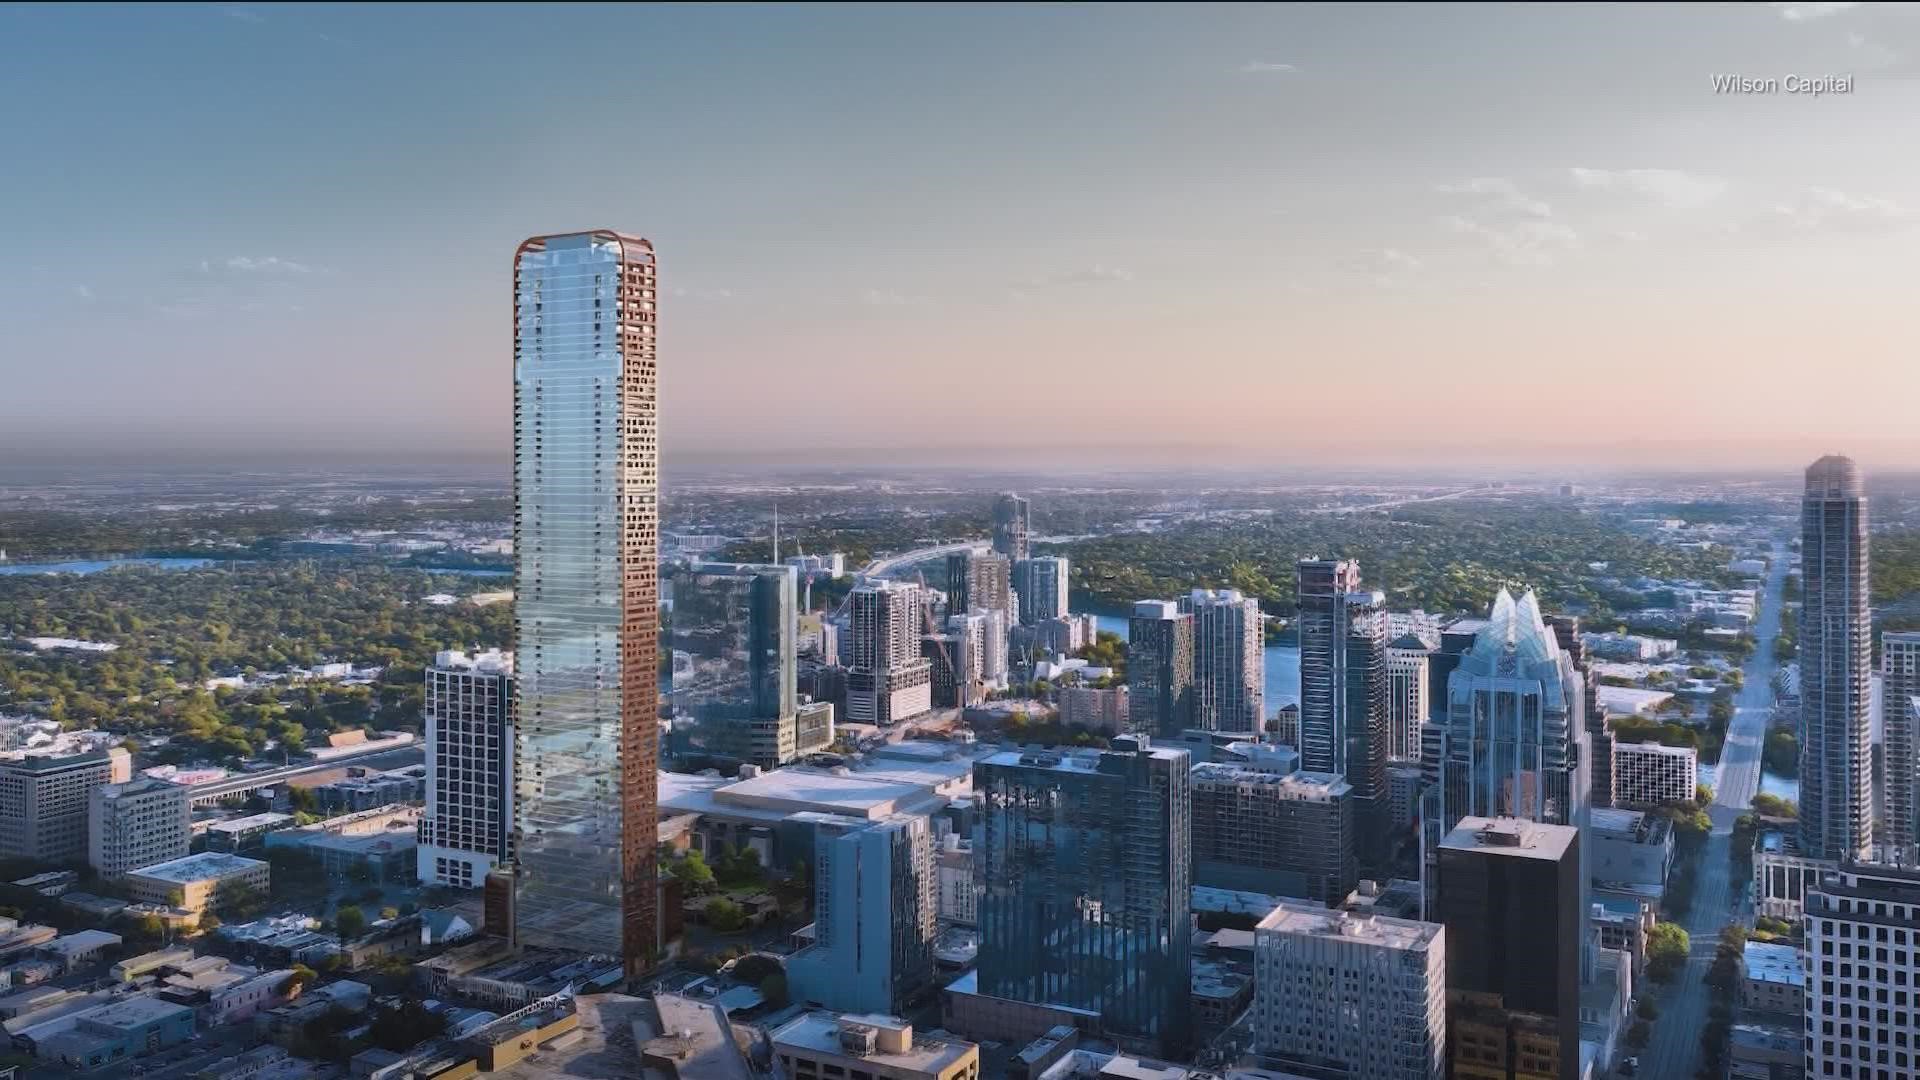 A new tower planned for Downtown Austin could become not only the tallest building in the city but the tallest in the state.